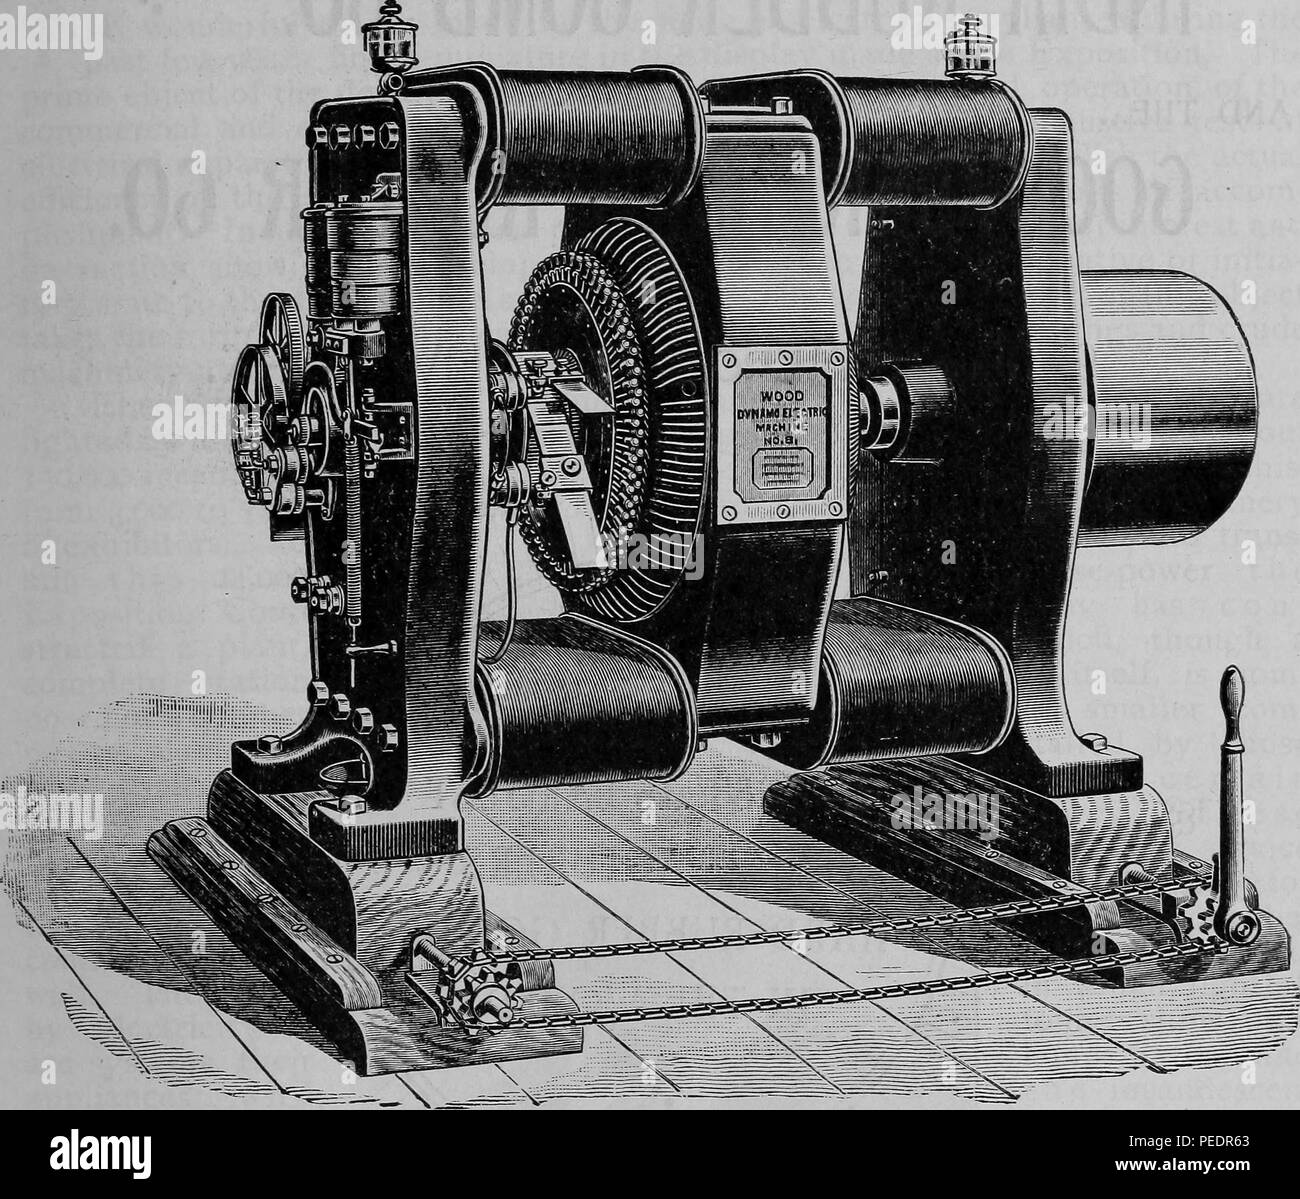 Black and white print advertising the 'Wood Dynamo Electric Machine, ' a generator manufactured by the Fort Wayne Electric Company in Fort Wayne Indiana, USA, which was exhibited in the Electrical Building at the World's Columbian Exposition( aka the Chicago World's Fair) and published in 'The Official Directory of the World's Columbian Exposition', 1893. Courtesy Internet Archive. () Stock Photo